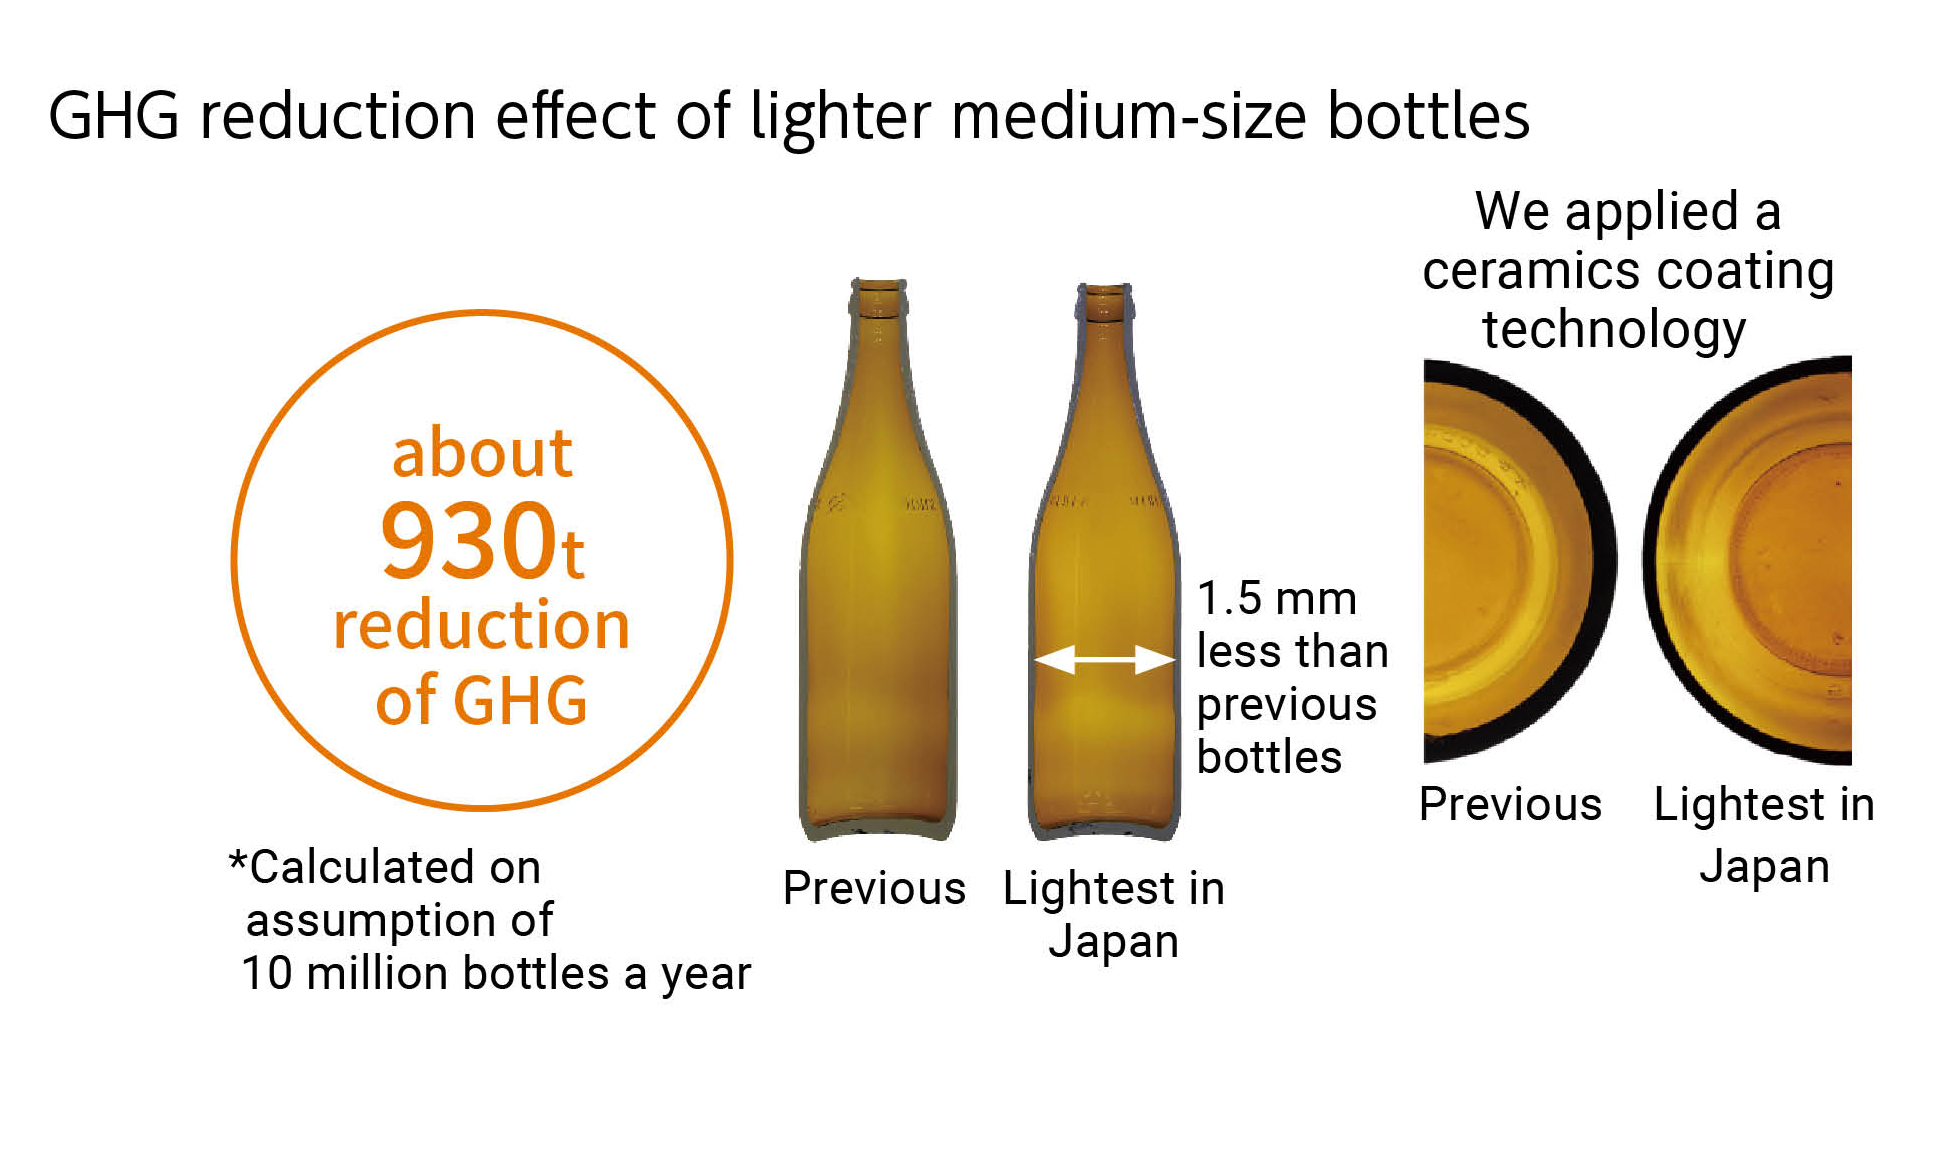 Figure: C02 reduction effect of lighter medium-size bottles about 930t reduction